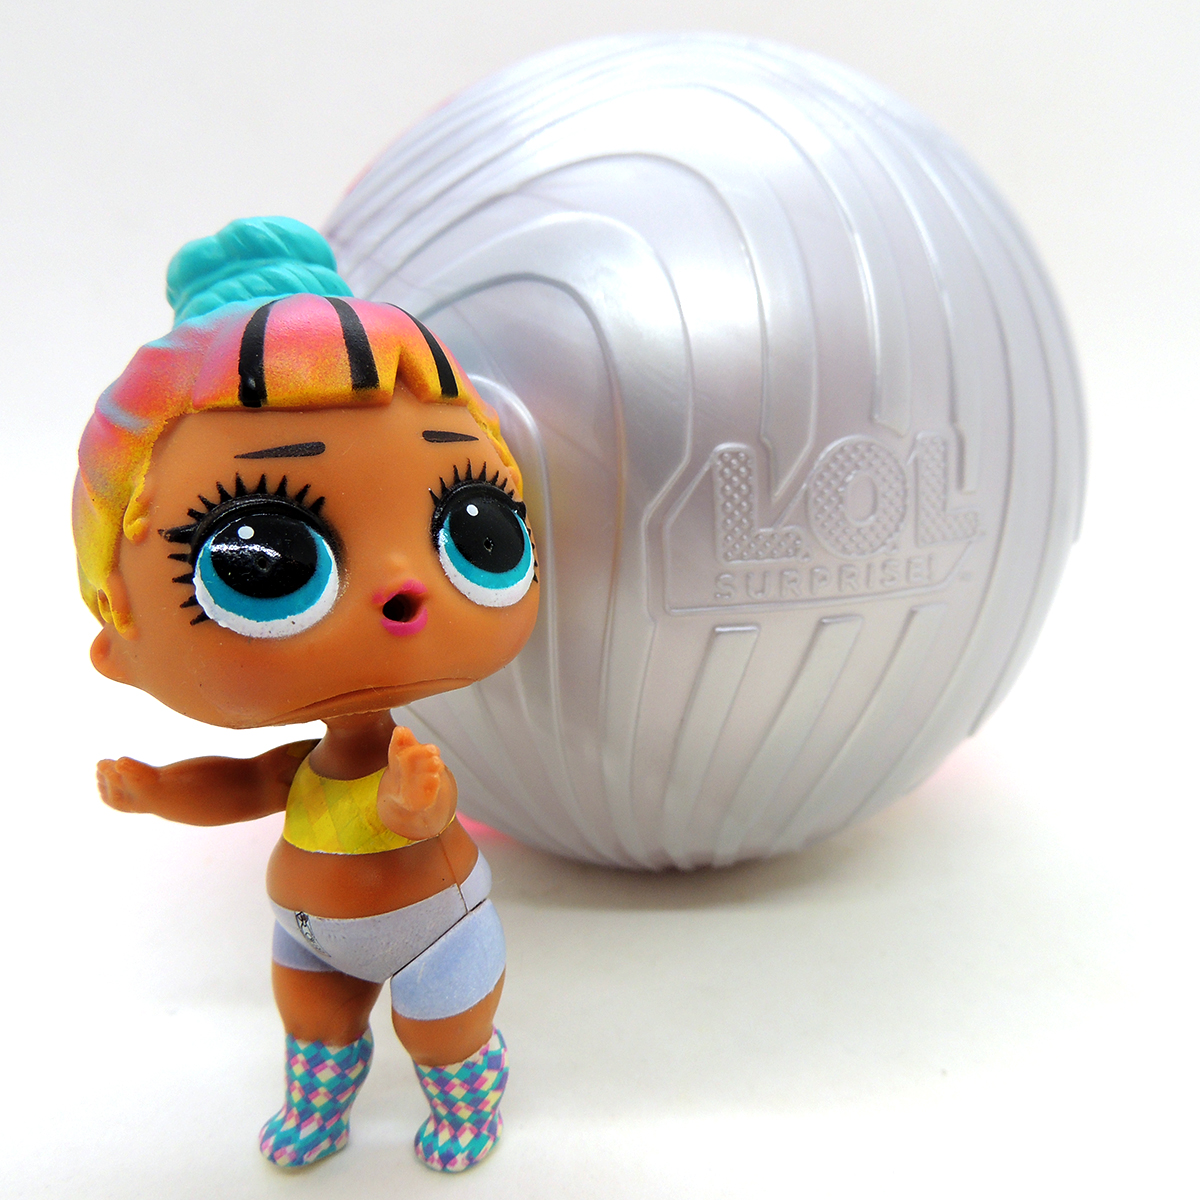 MGA Entertainment Debuts New L.O.L. Surprise! Lights Dolls - The